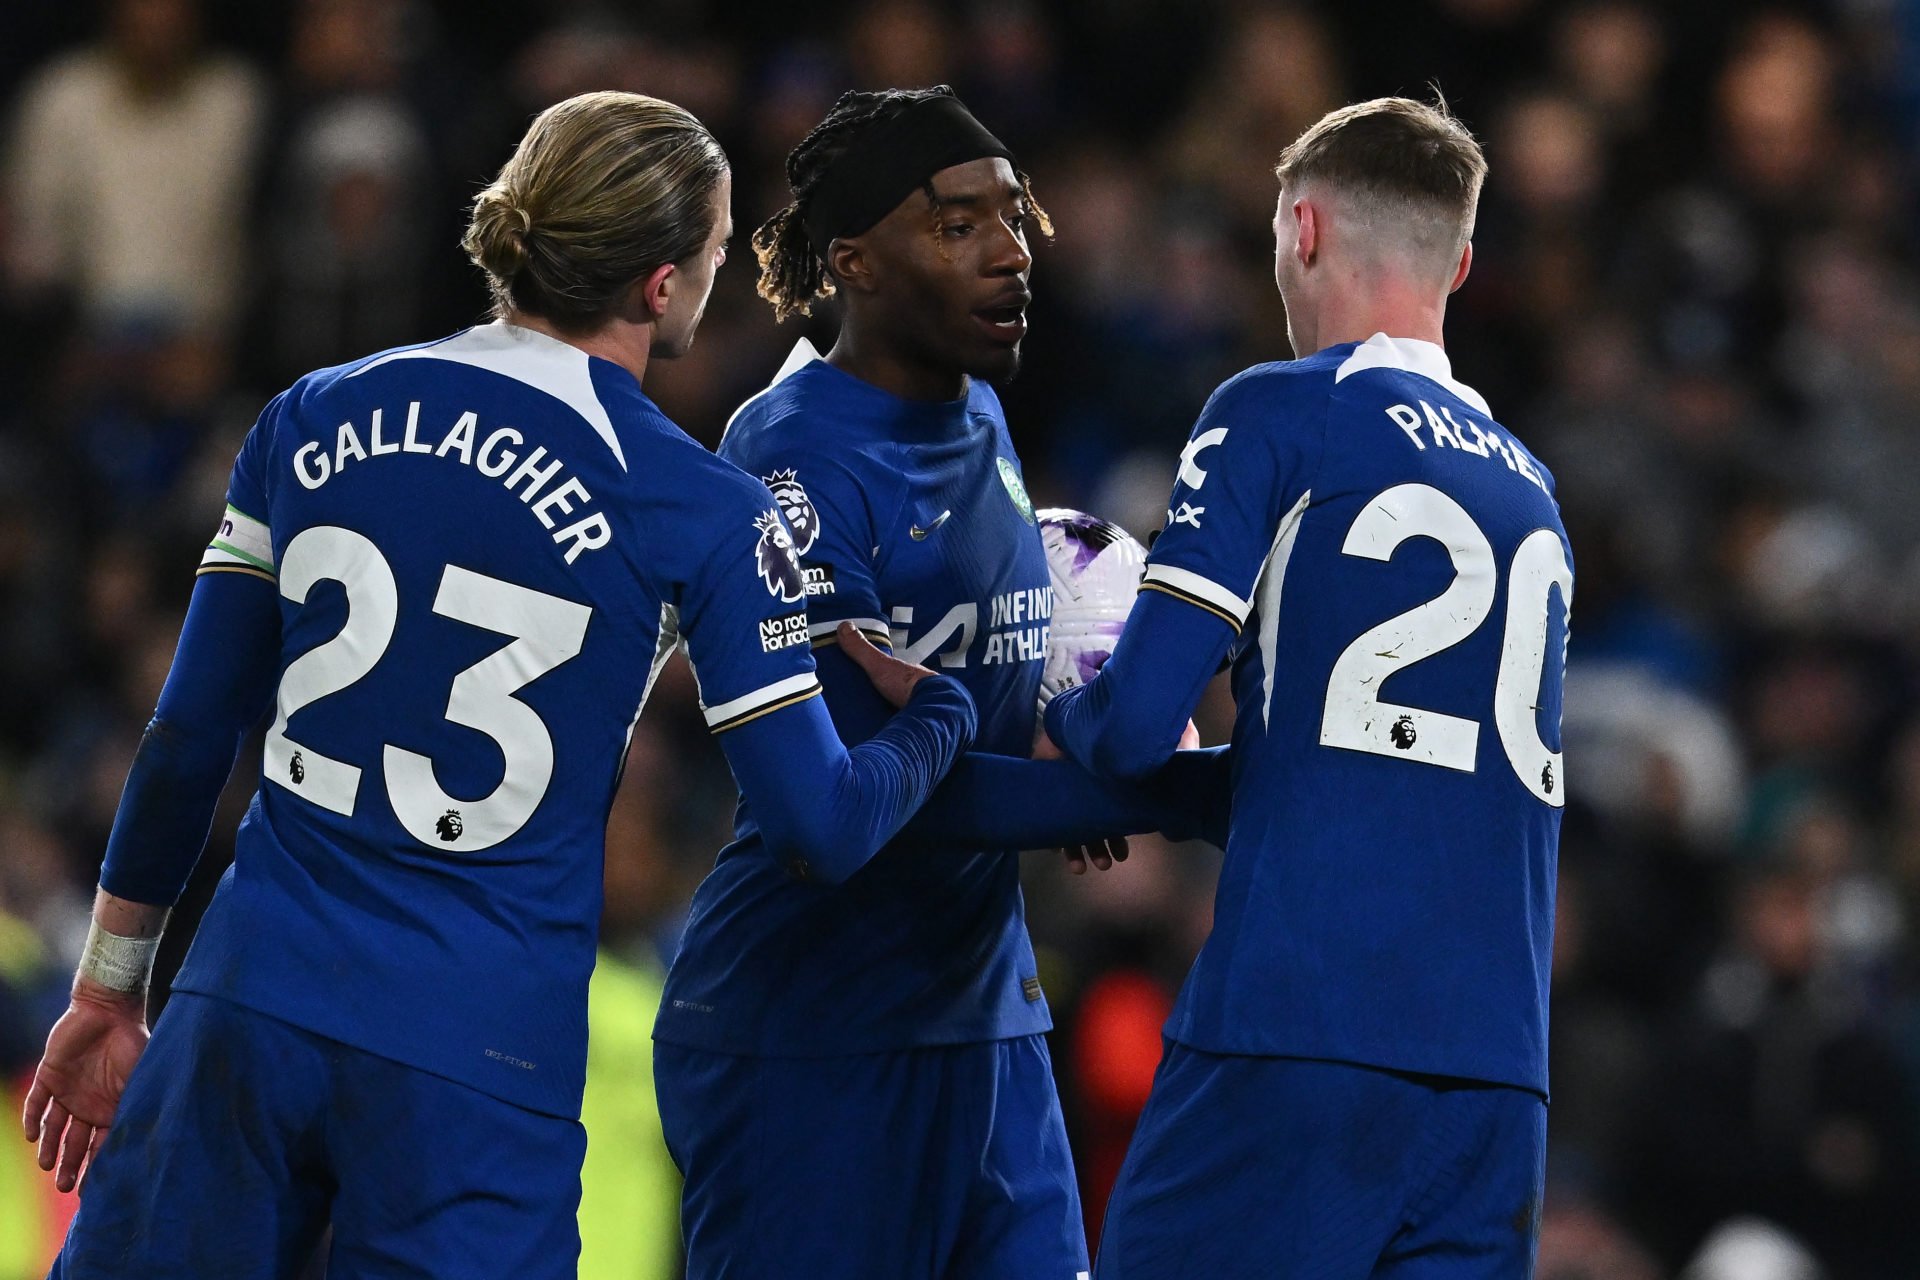 Noni Madueke posts eye-catching reaction on Instagram after penalty spat during Chelsea vs Everton game